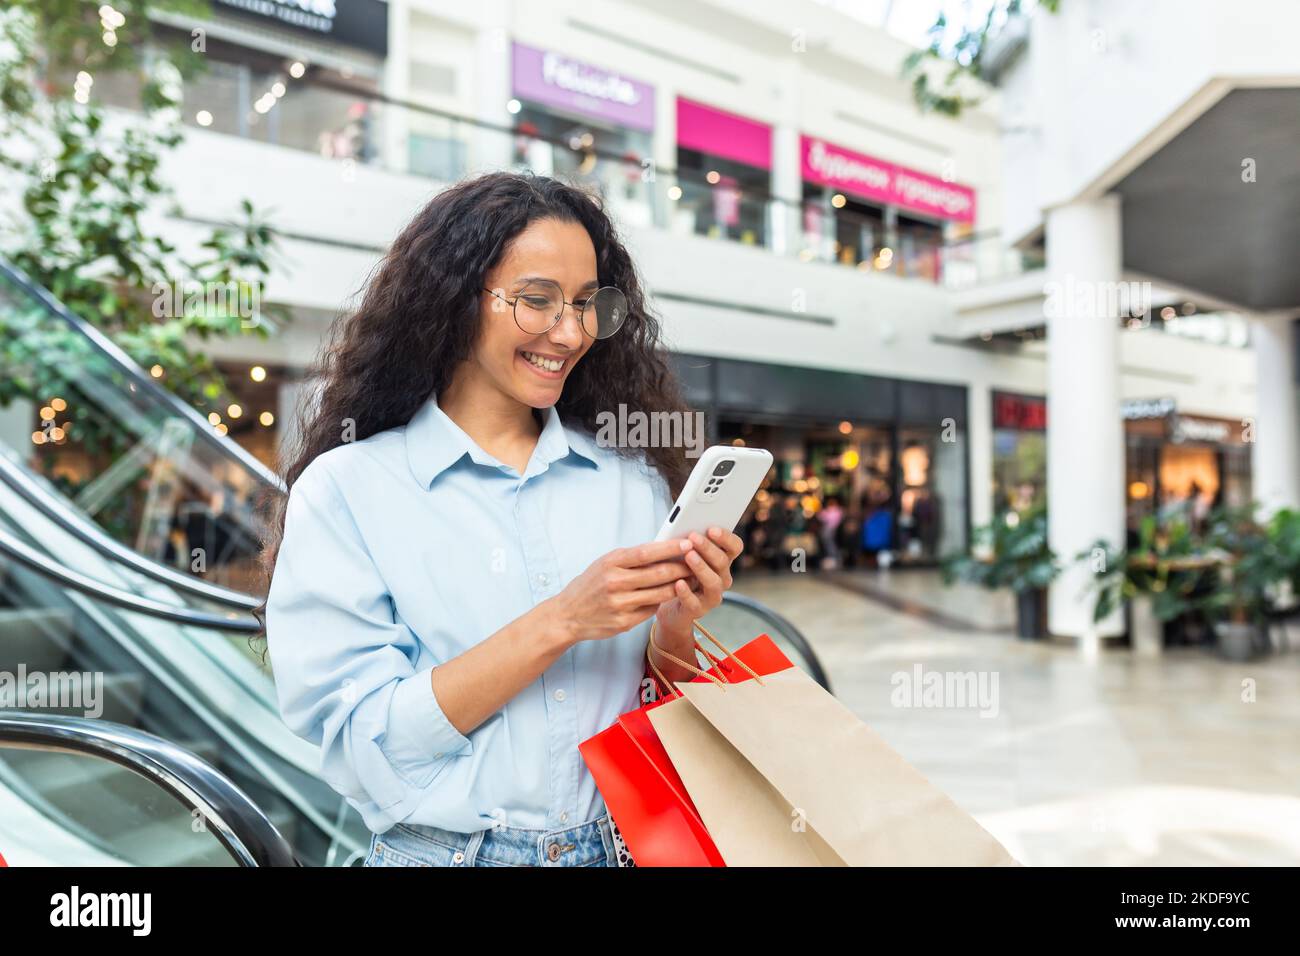 Happy woman shopping for clothes during the period of discounts and promotional offers, Hispanic woman smiling and happy browsing online discounts using smartphone, inside a modern large store. Stock Photo